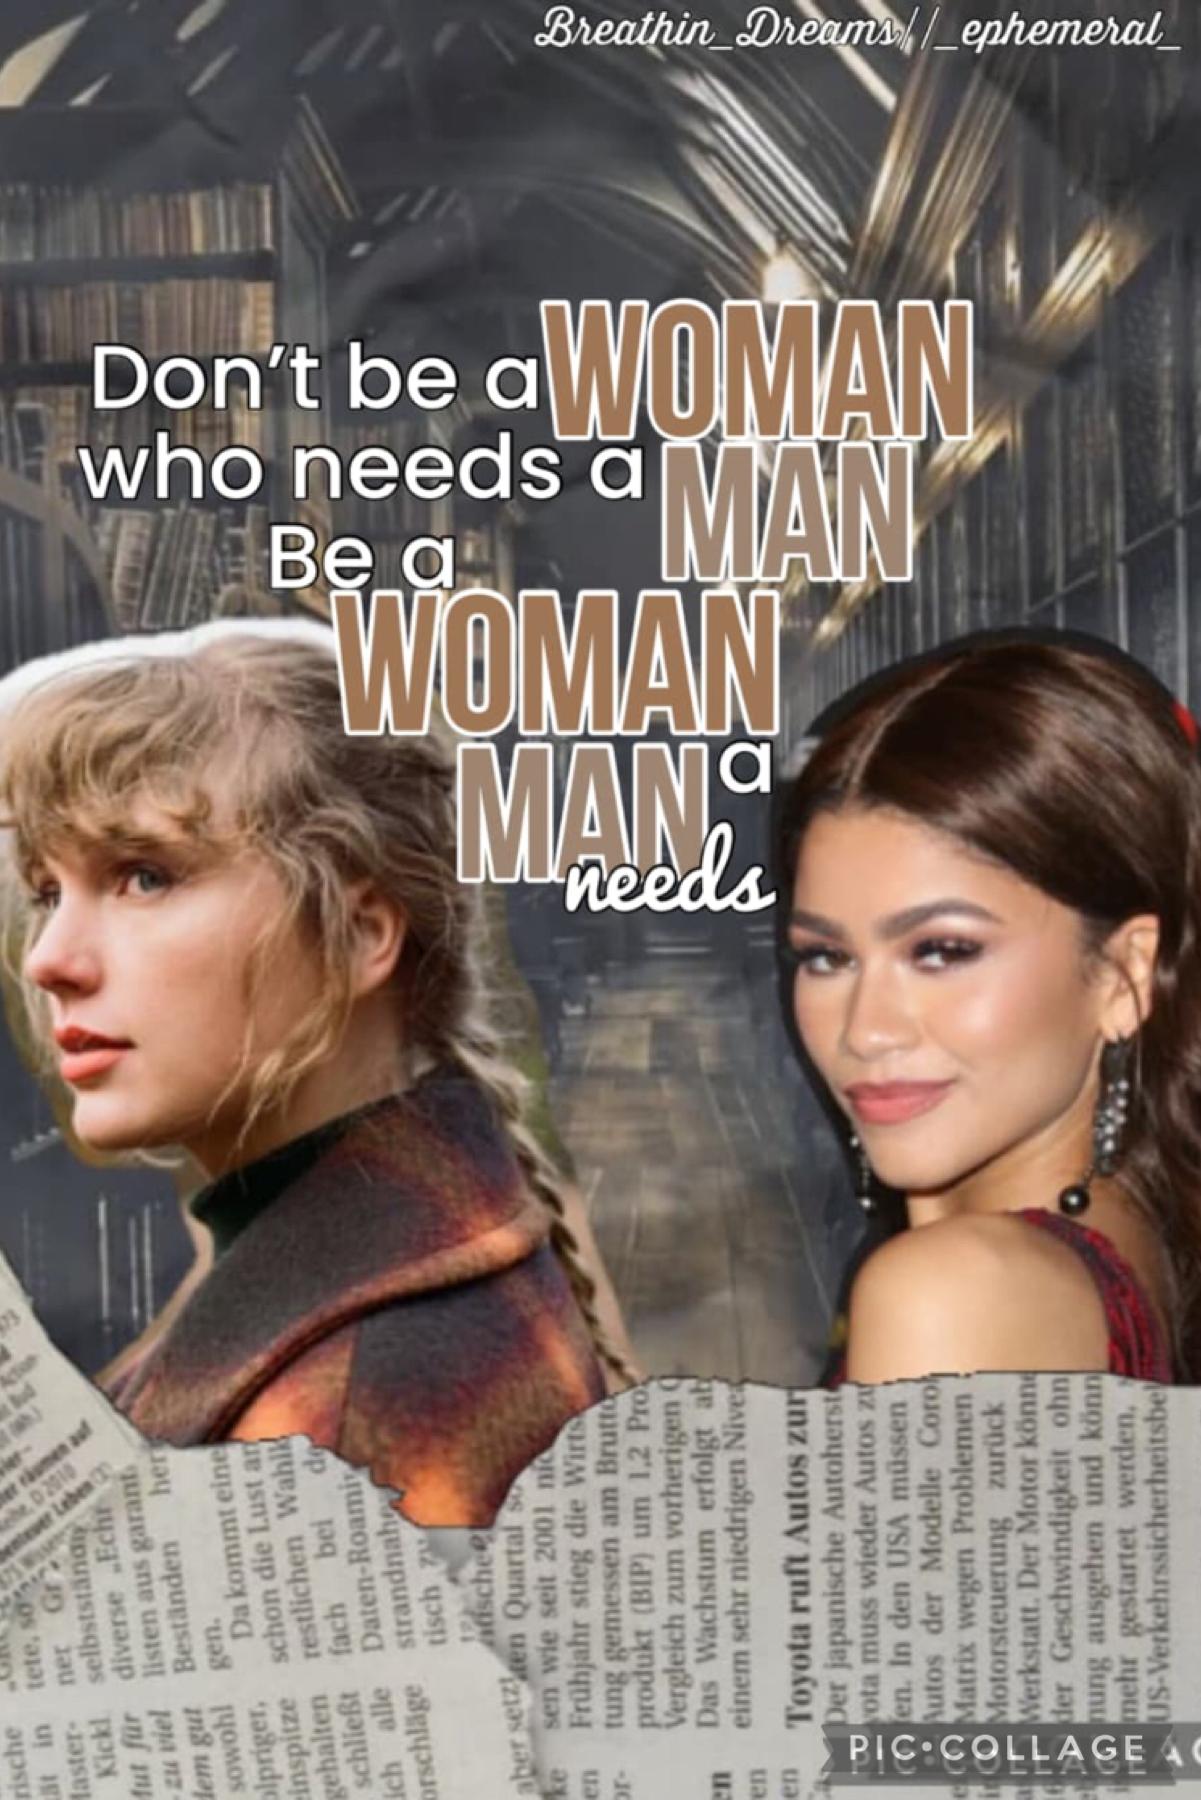 30.3.22 Taylor Swift and Zendaya aesthetic collage collaboration with _emphmeral_